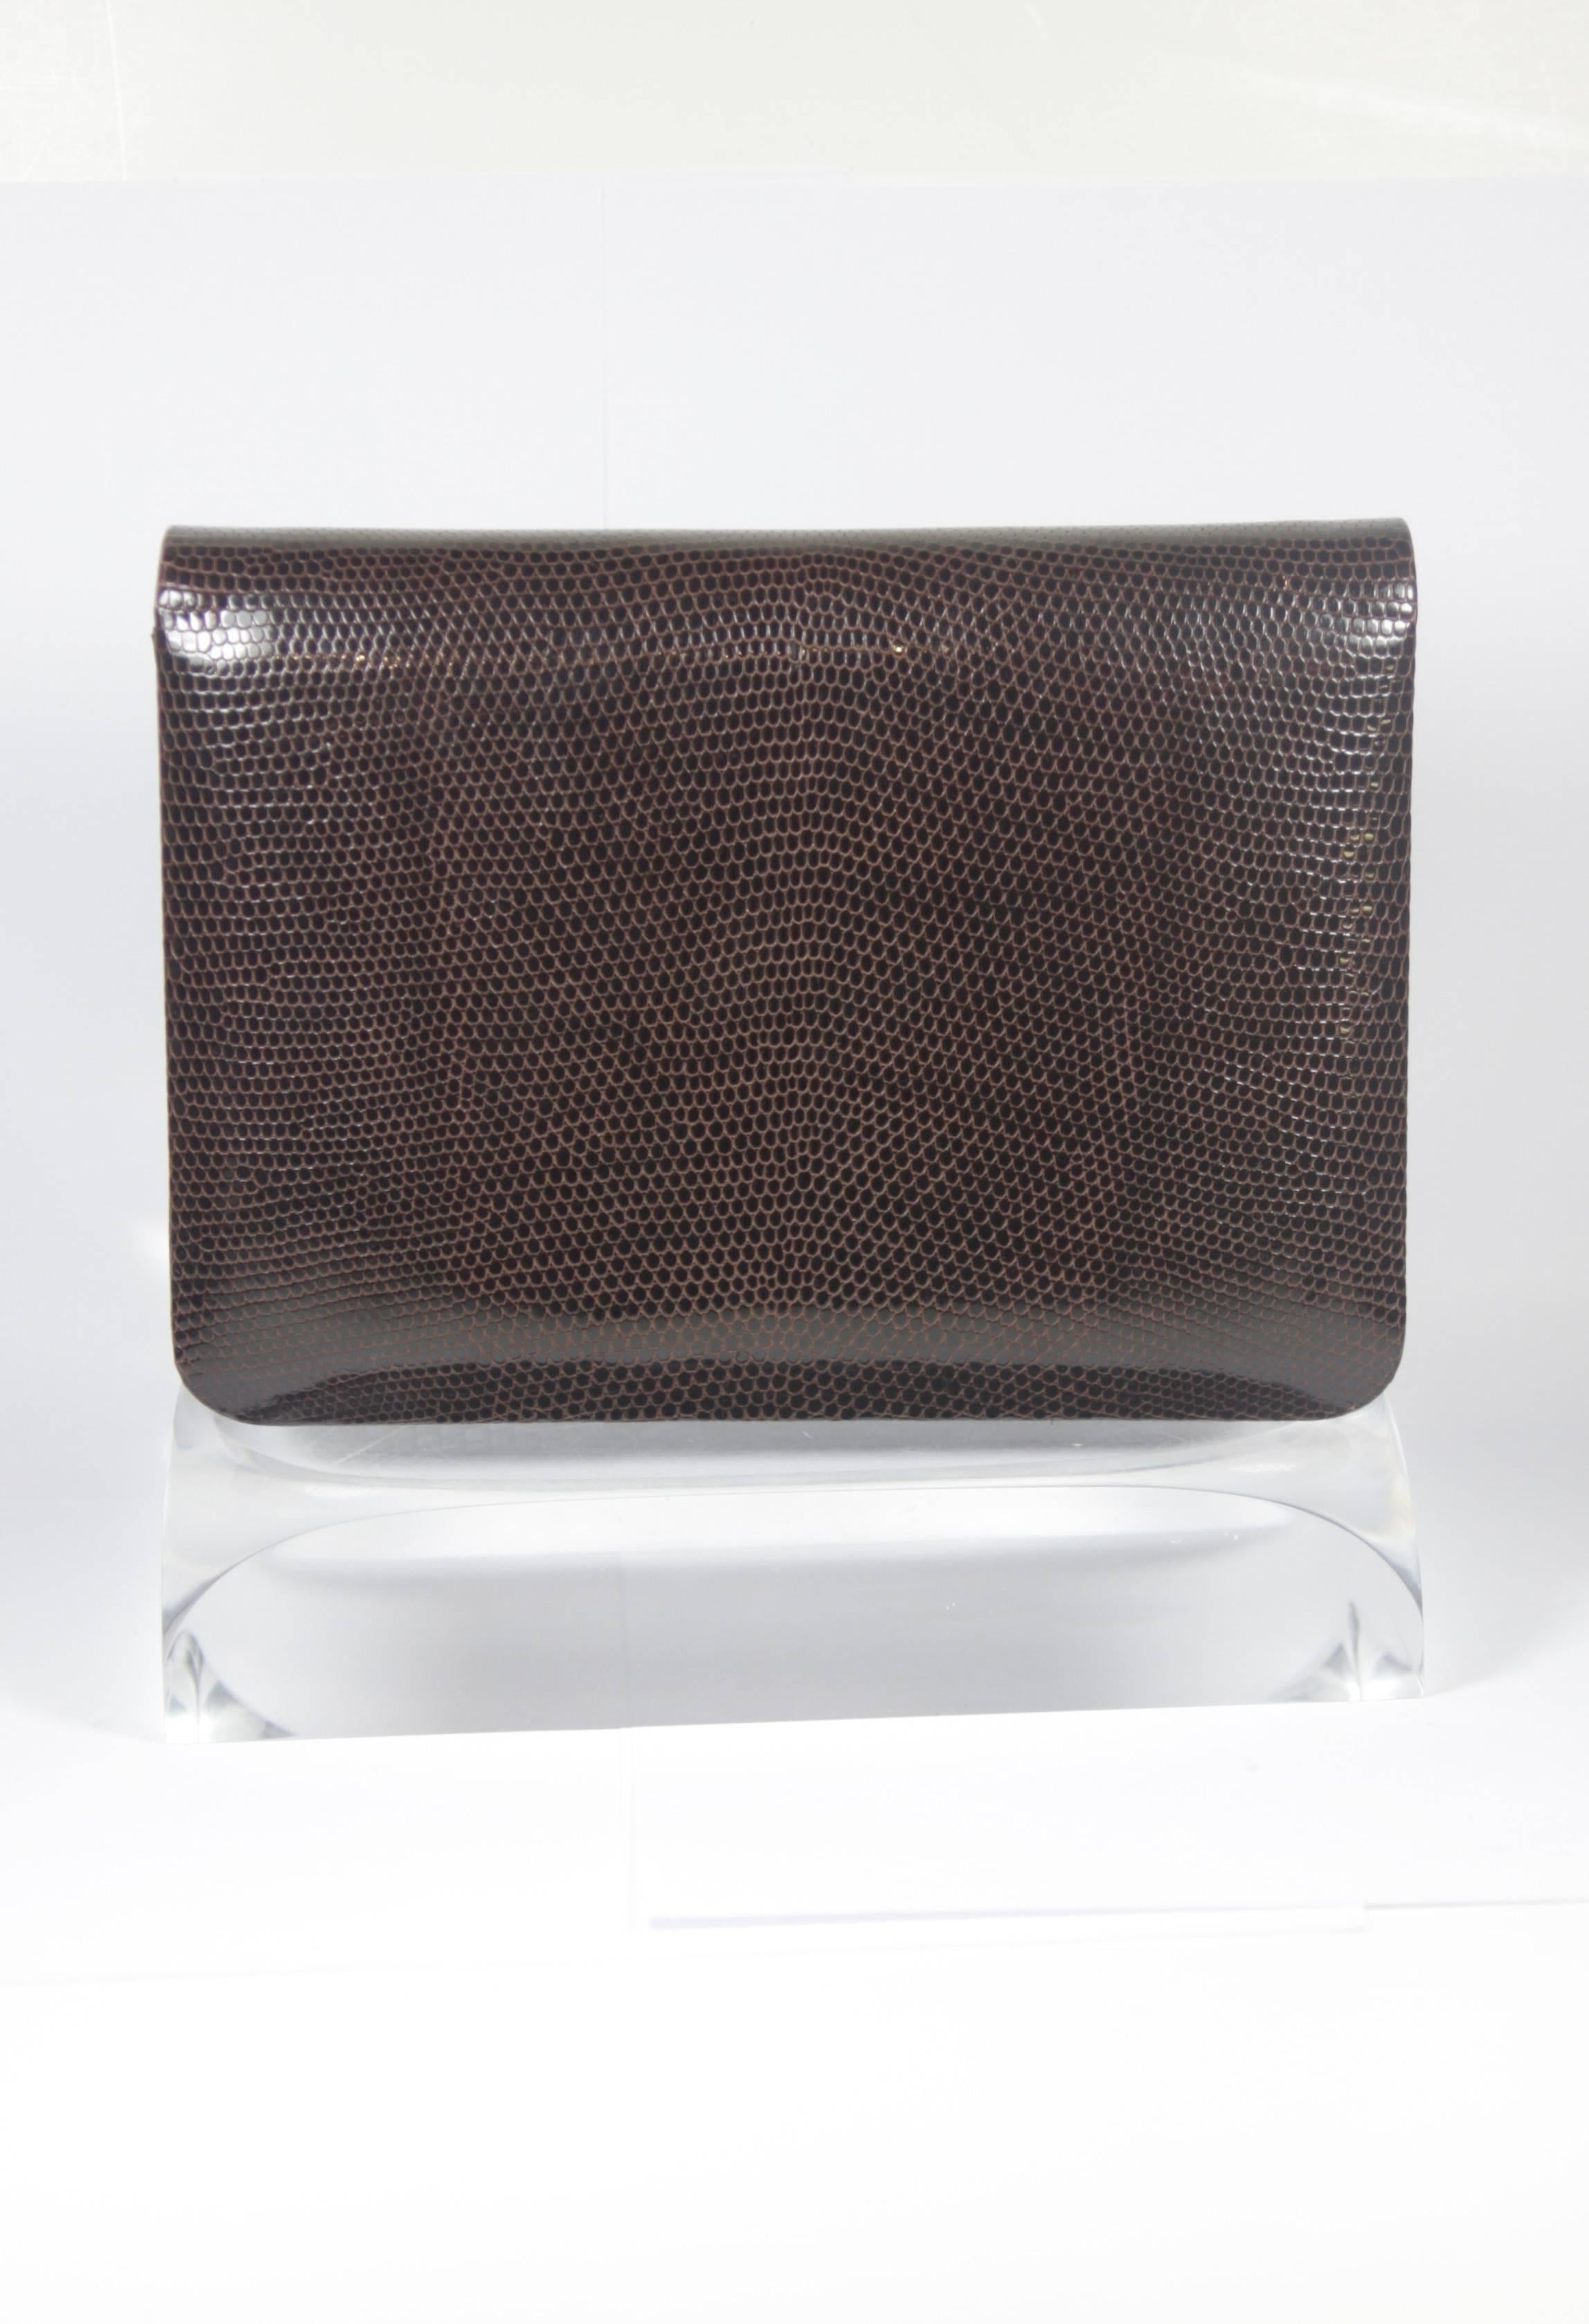 LAMBERTSON TRUEX Brown Lizard Clutch with Gold Hardware and Optional Strap 2